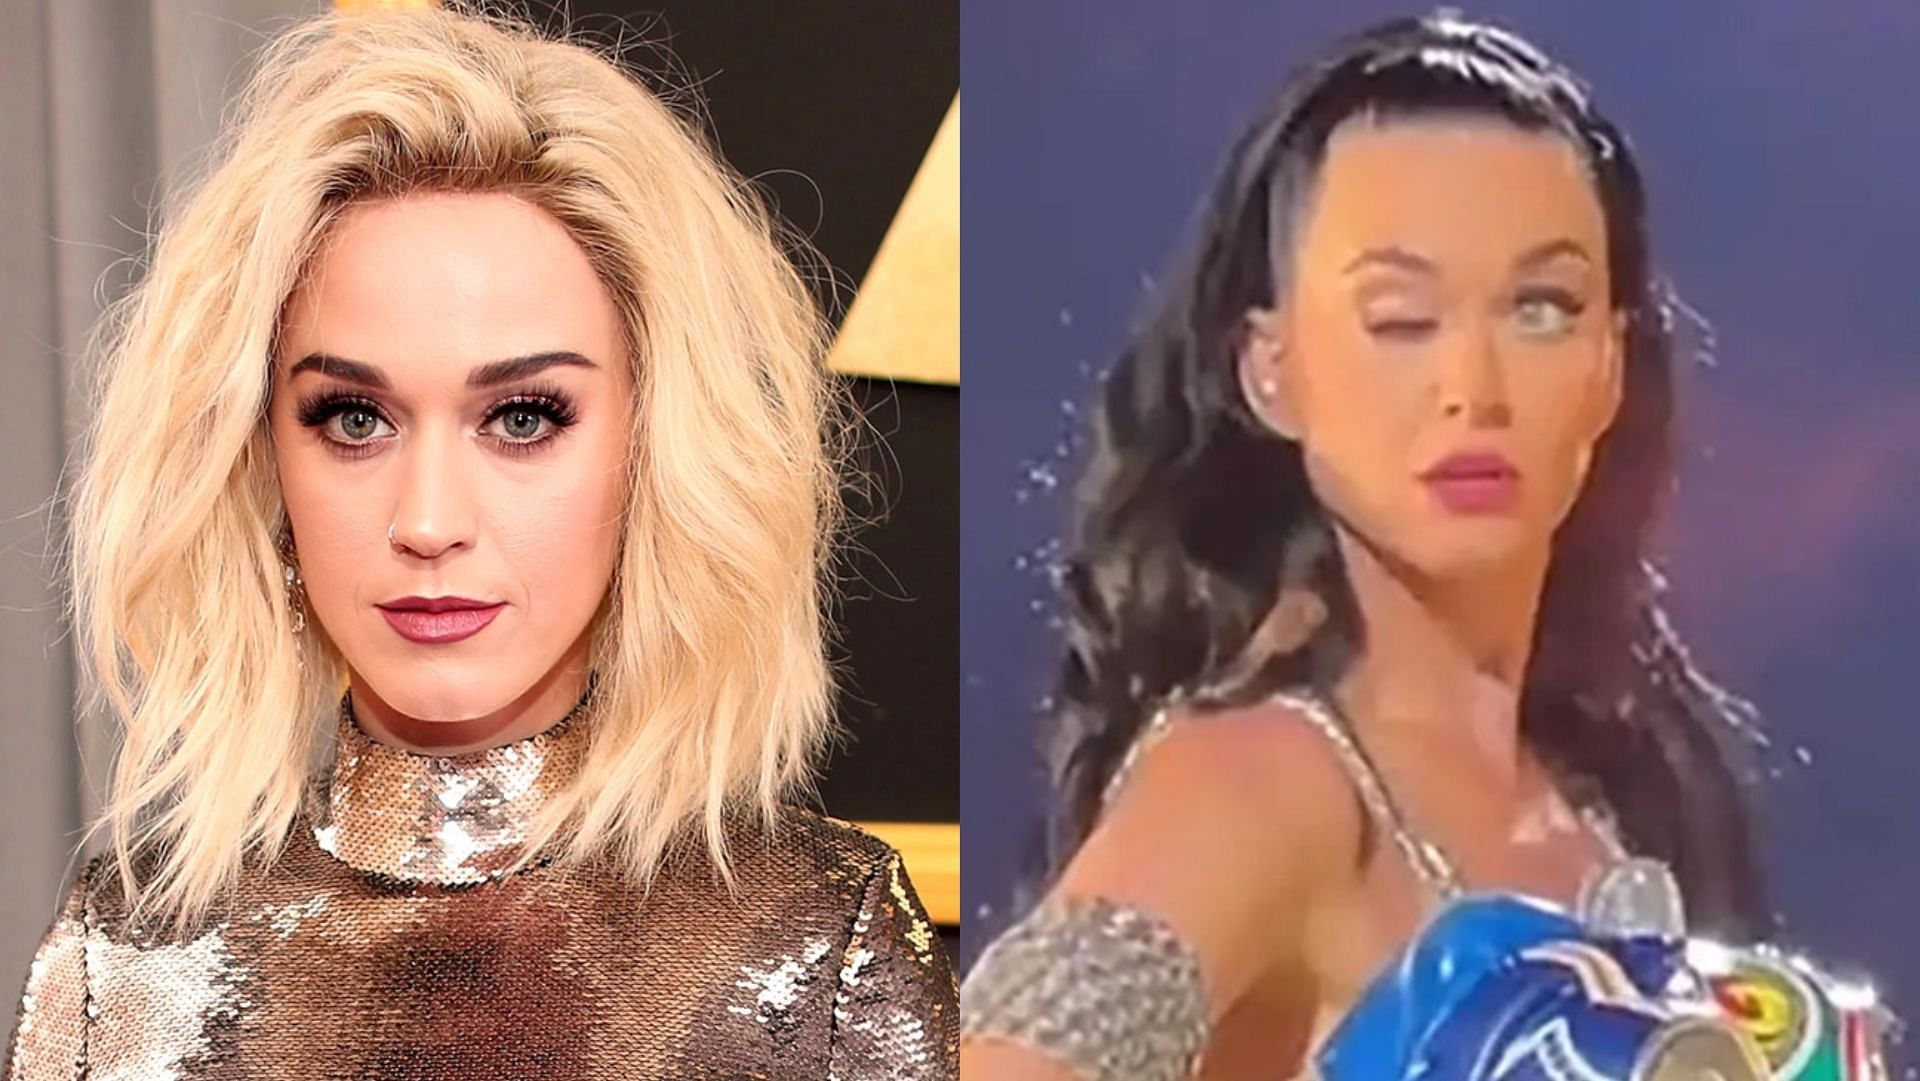 Katy Perry claims her eye malfunction was an intentional stunt. (Image via Christopher Polk/Getty, @AreOhEssEyeEe/Twitter)